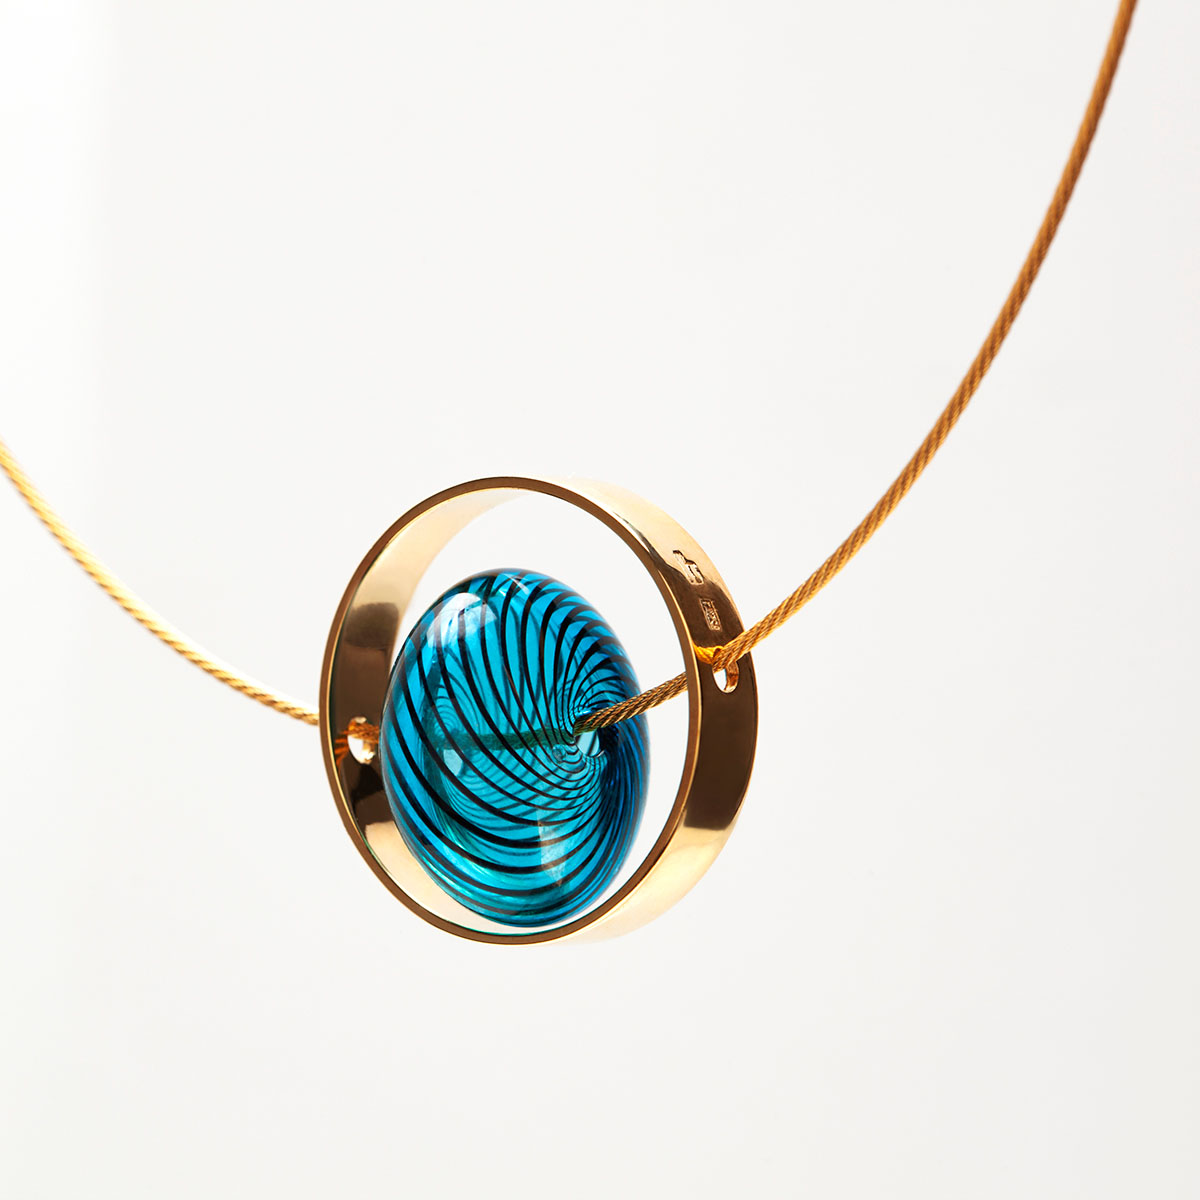 Xar handmade necklace in 18k gold plated 925 silver, blue glass and golden galvanized steel cable designed by Belen Bajo